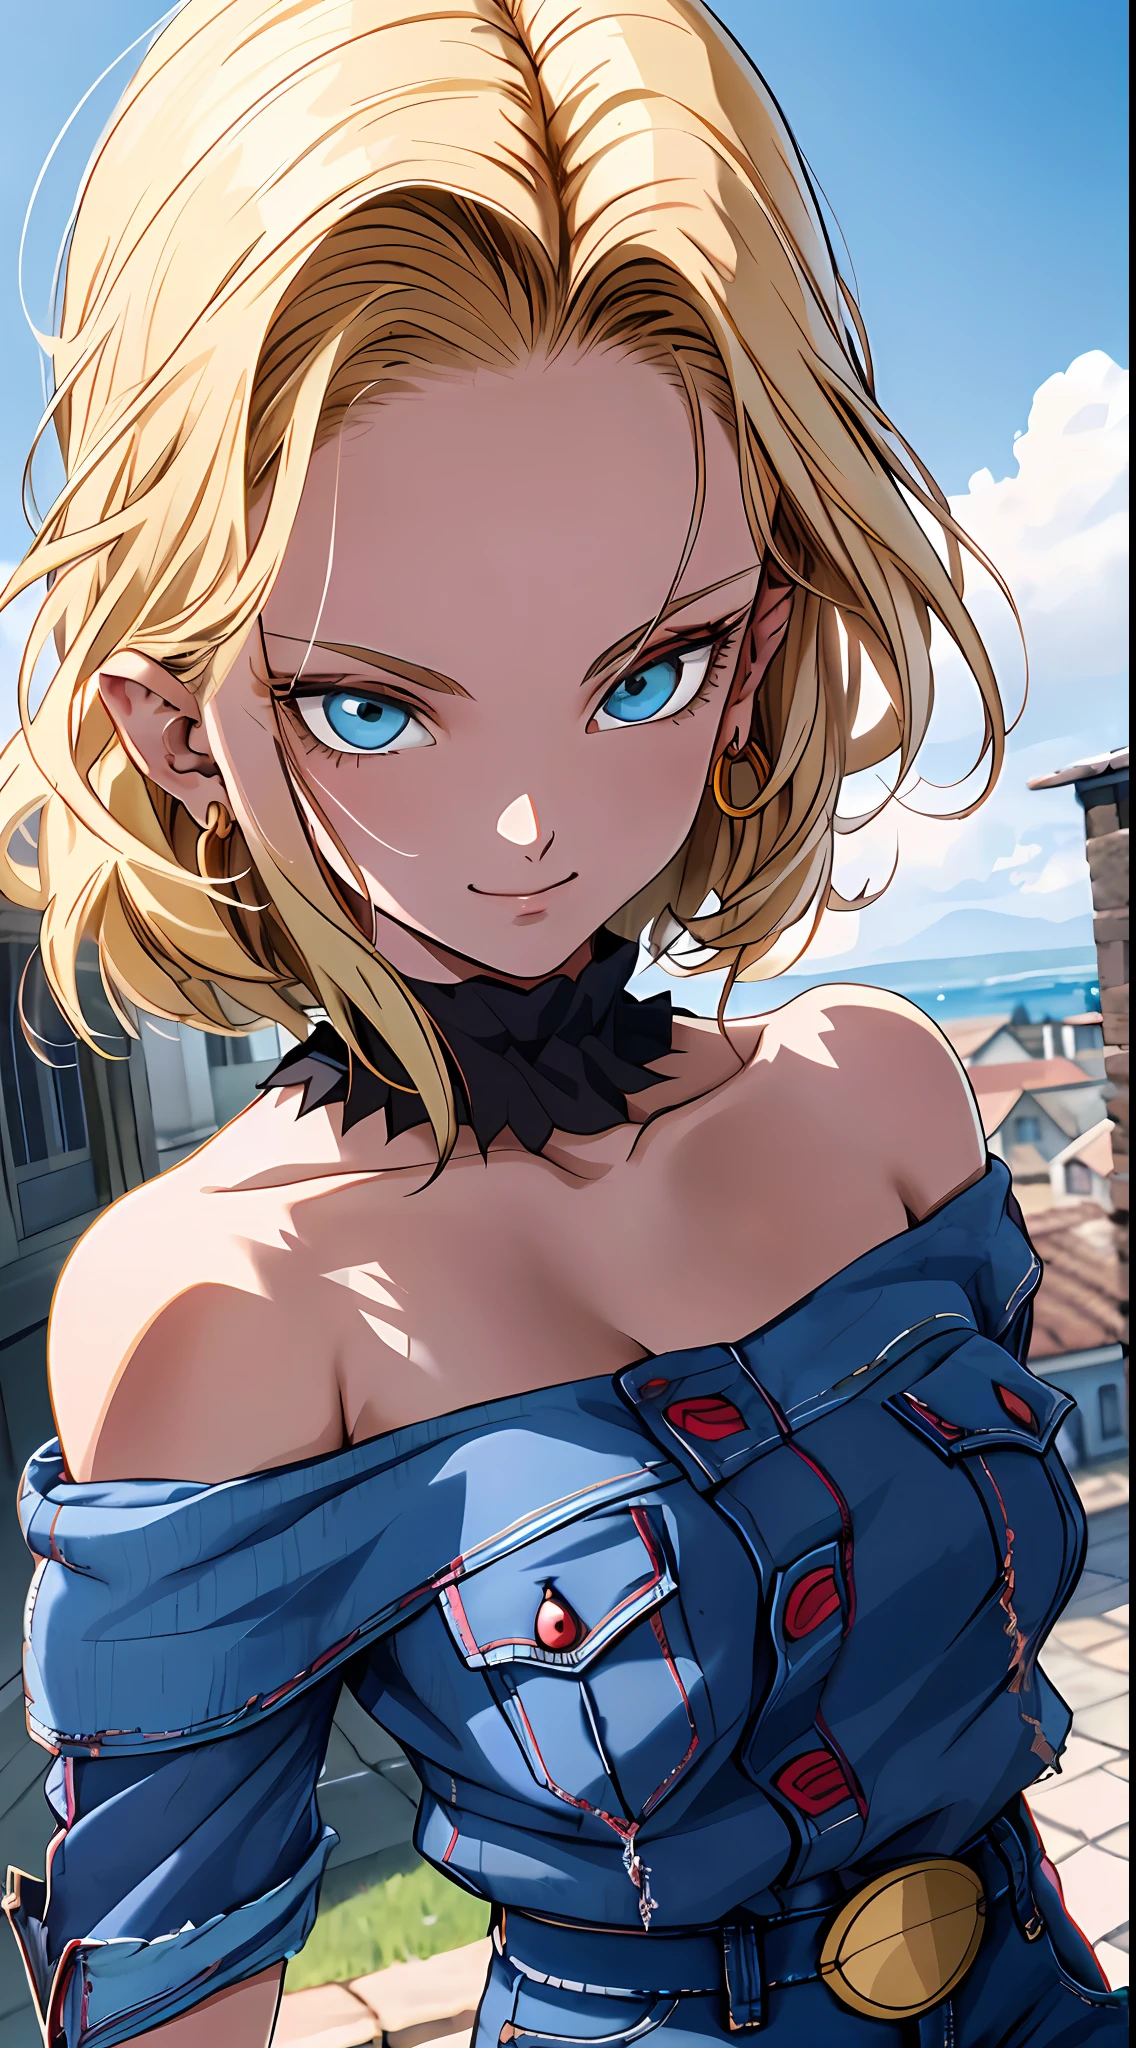 tmasterpiece， Best quality at best， ultra - detailed， absurderes， Portrait beautiful Android18DB， solo， 耳Nipple Ring， jewely， (Off-the-shoulder attire:1.5)，cleavage， upperbody closeup，ssmile， thongs， vests， ​​clouds， Skysky， daysies， exteriors，Denim super shorts，best qualtiy， tmasterpiece， intricately details， Tone-mapping， Sharp focus， ultra - detailed， Artstati is the trend，